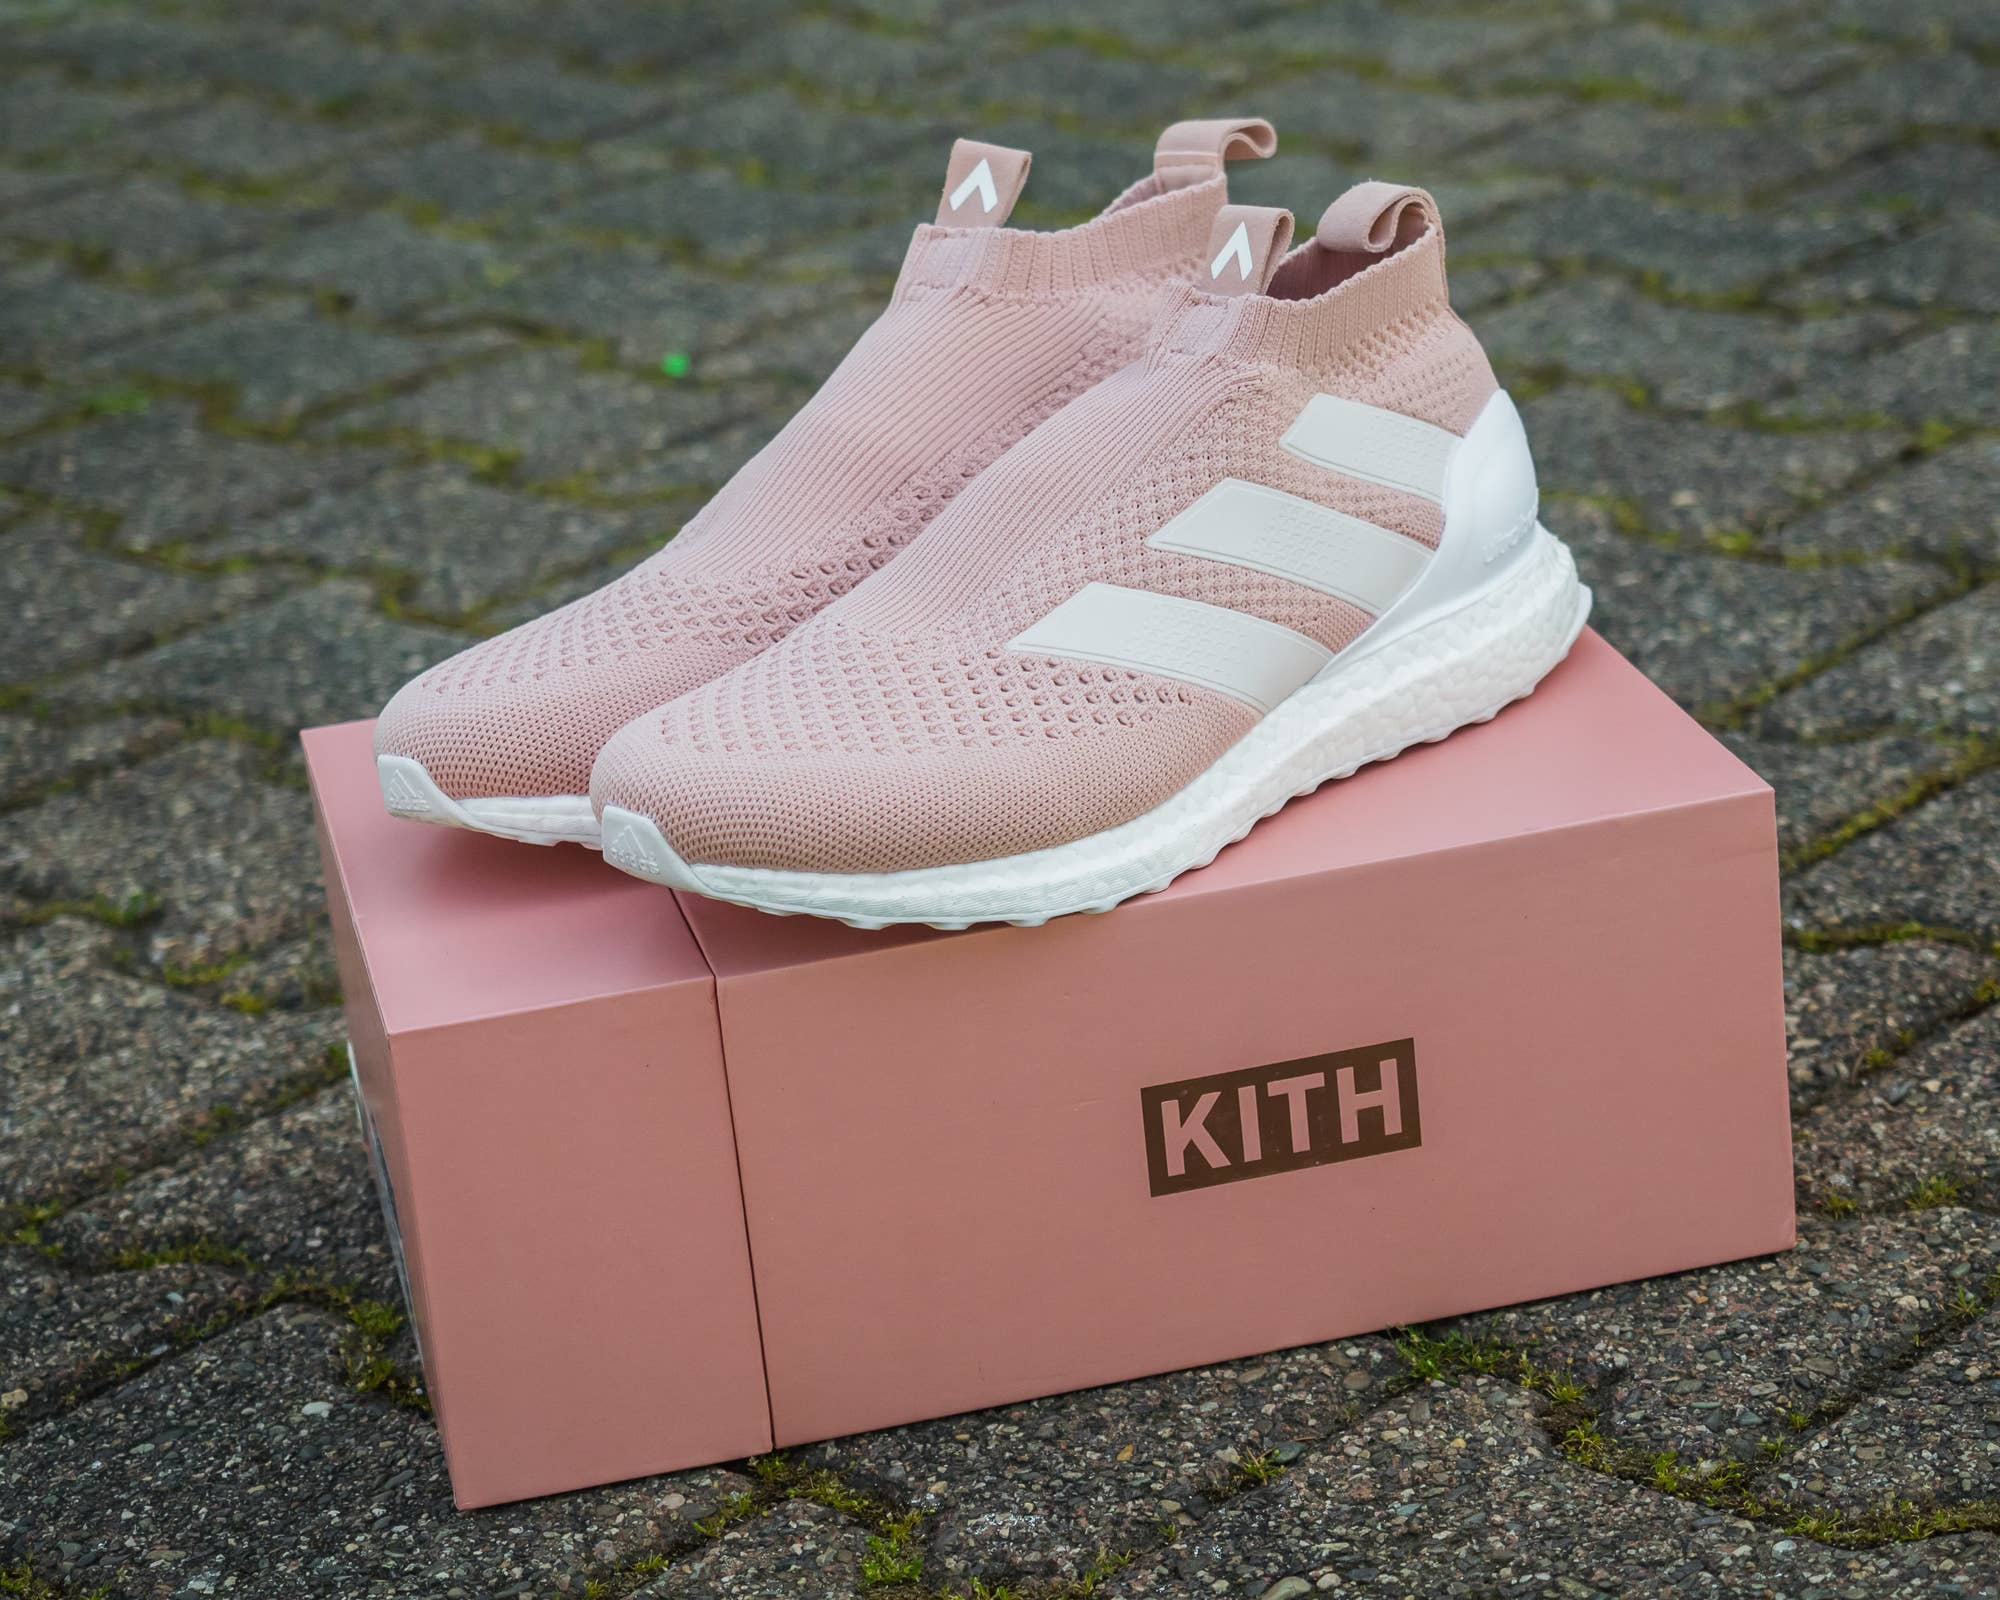 master Production Postage The Next Kith x Adidas Project Leaks | Complex